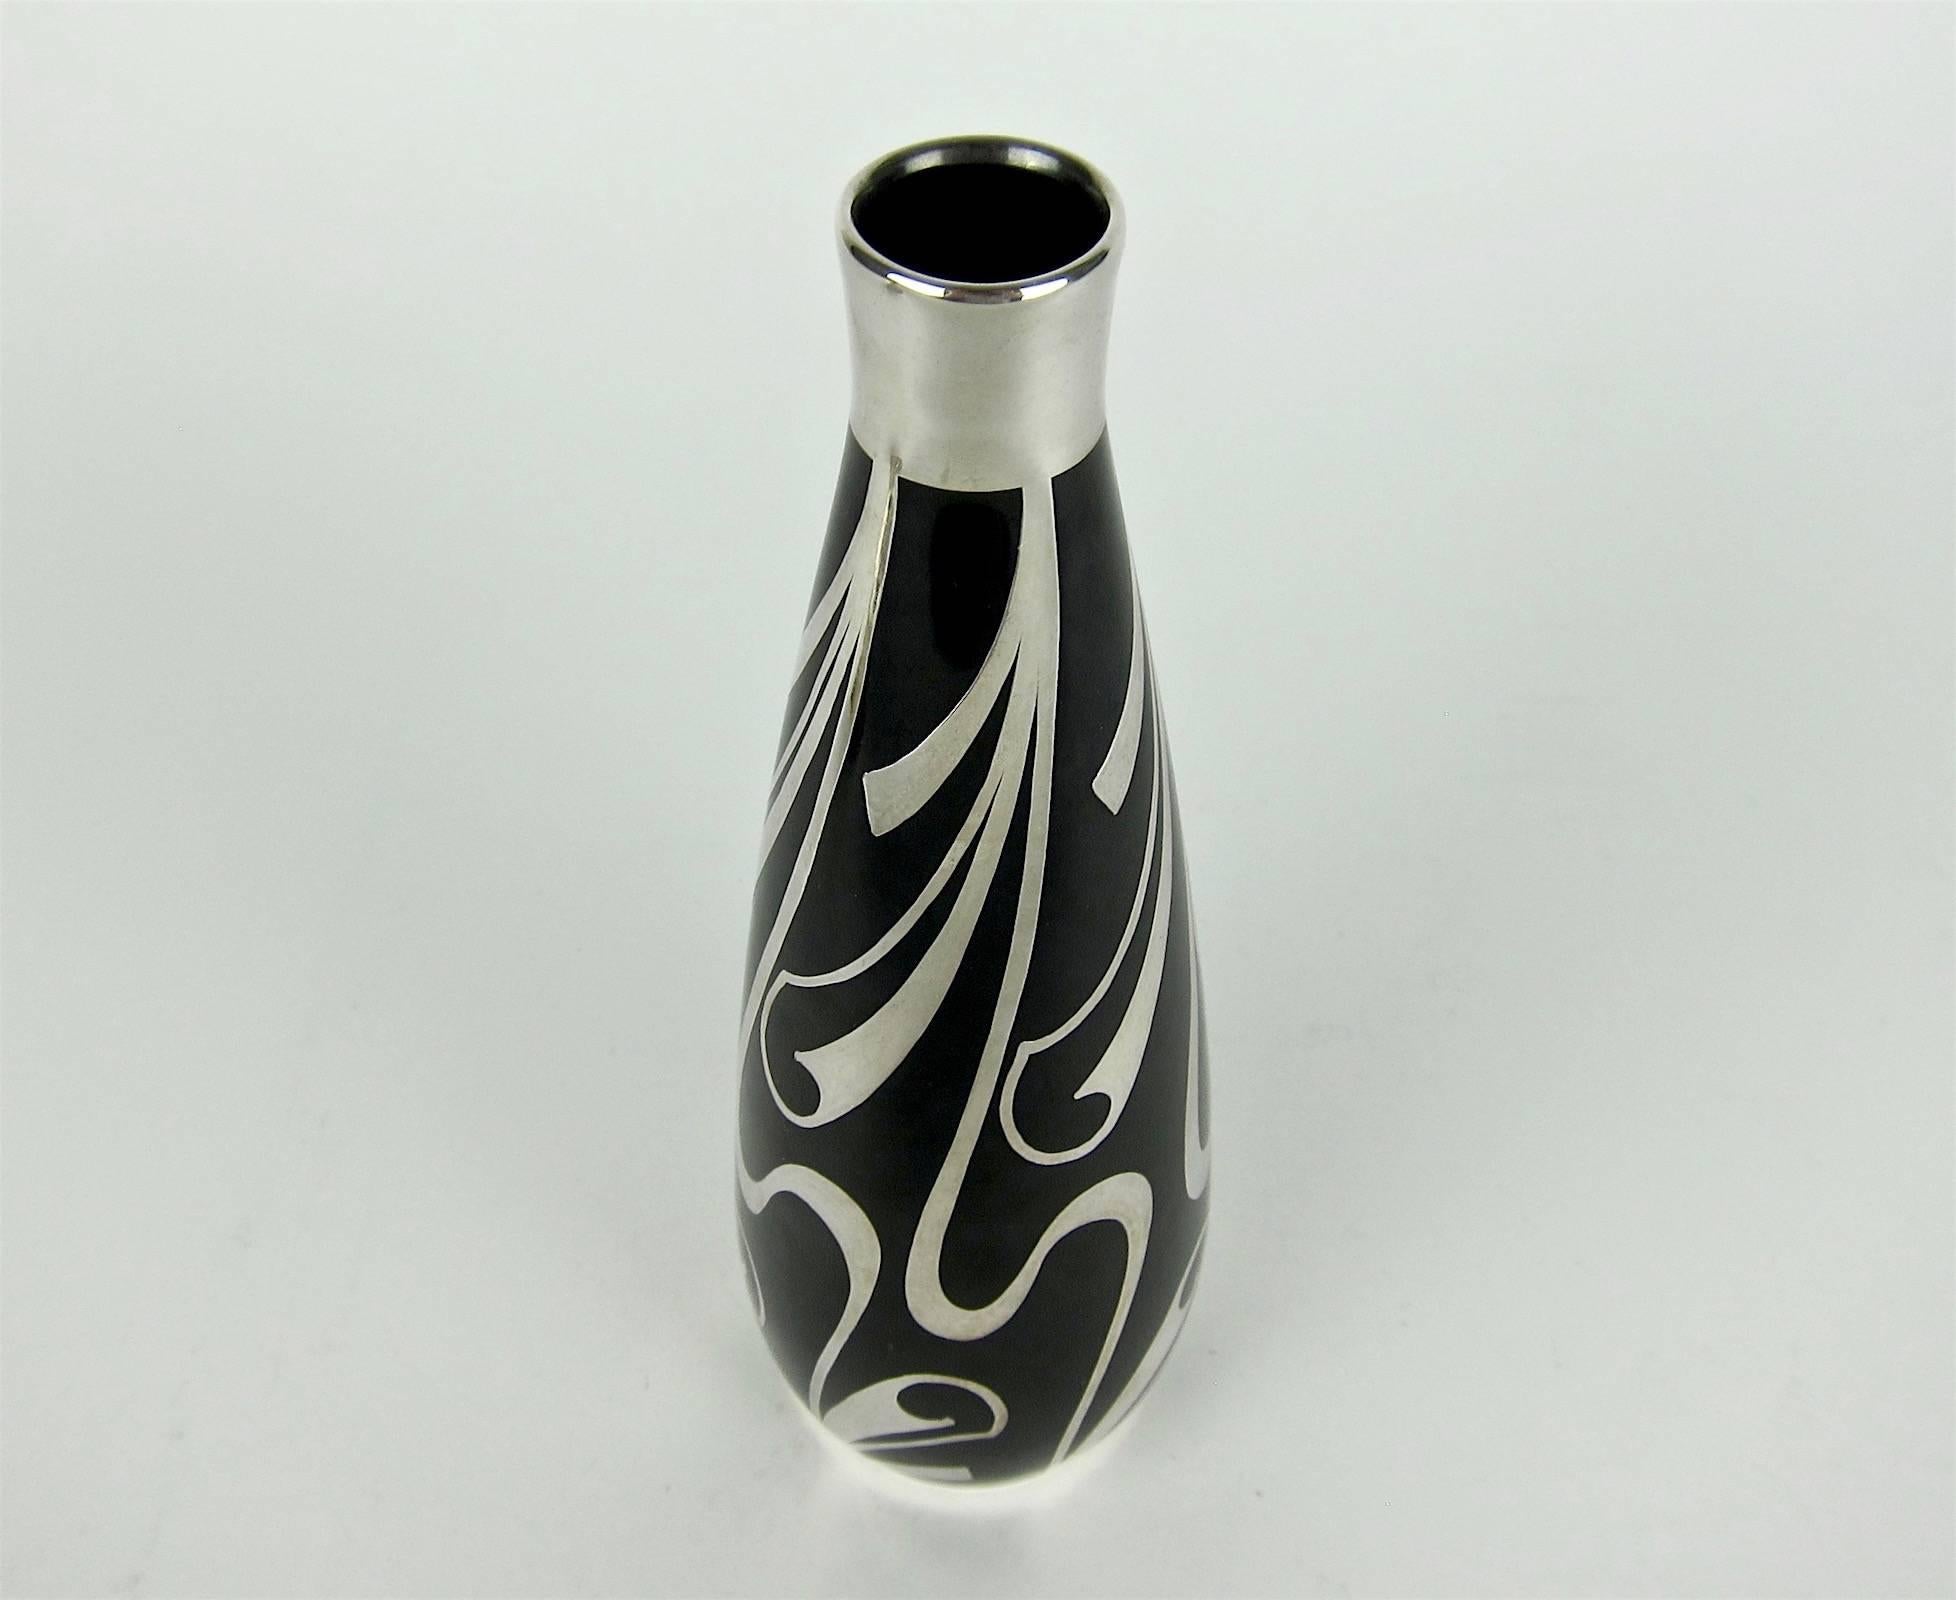 A Mid-Century black vase in fine Hutschenreuther porcelain with a contrasting overlay of sterling silver by Spahr & Co./Silberbelegwaren-Fabrik of Germany. Friedrich Wilhelm Spahr decorated this stylish vintage vase with swirling and scrolling